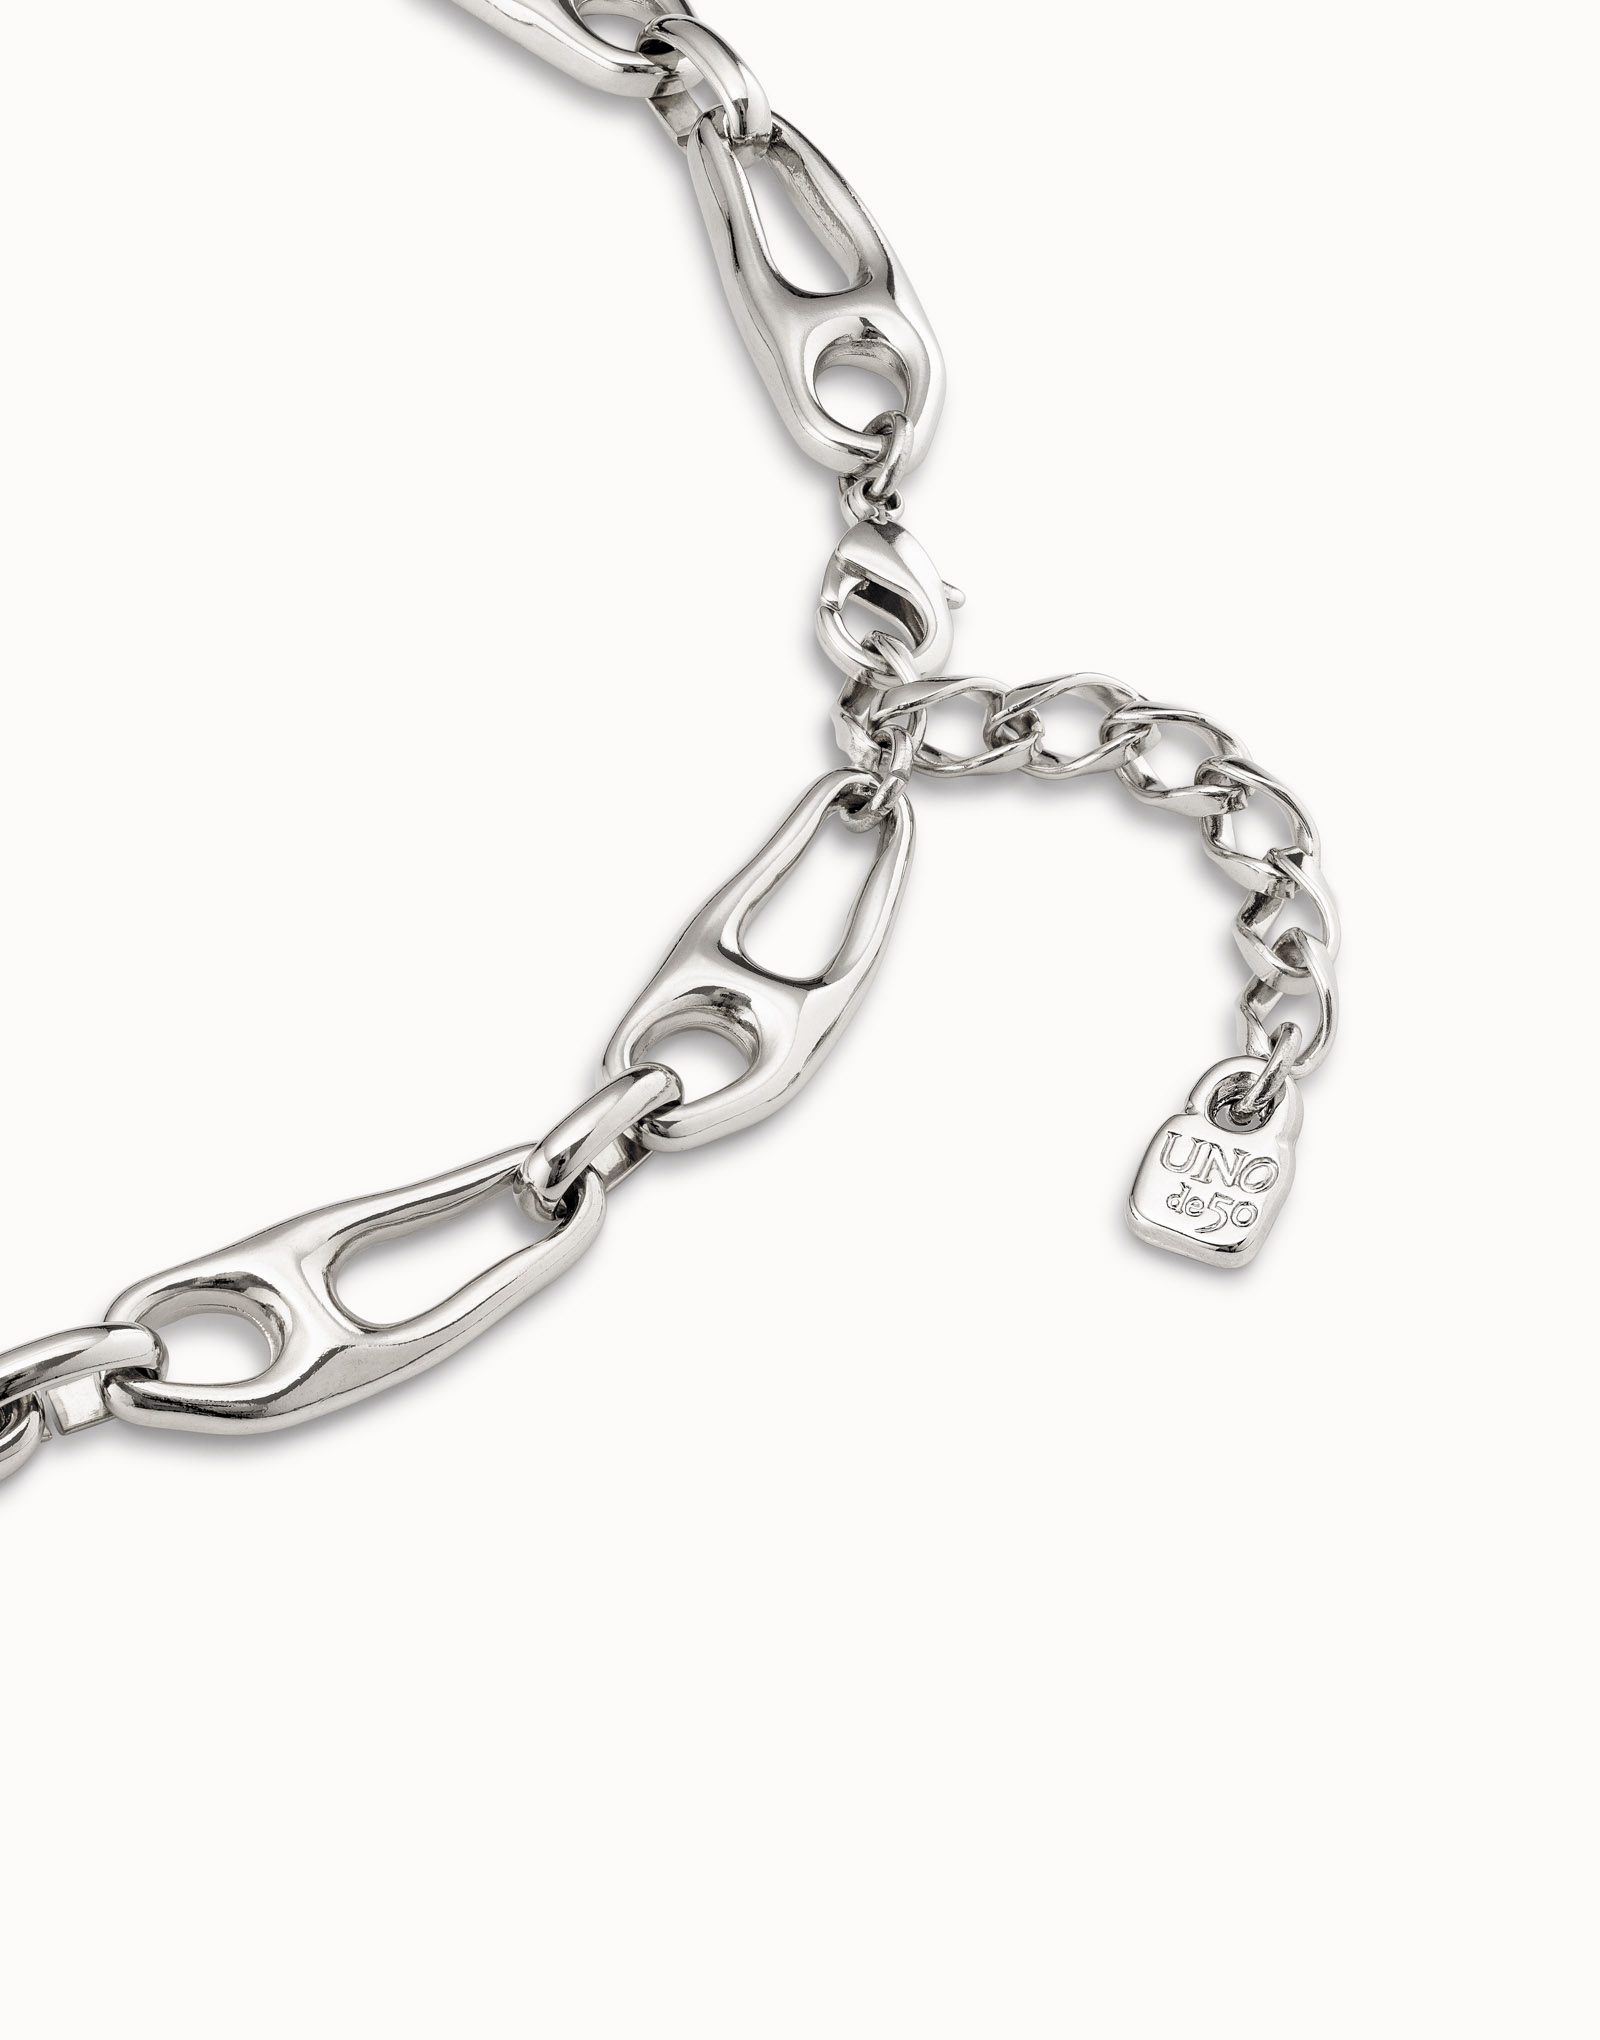 Collana corta placcata argento Sterling e maglie piccole, Argent, large image number null